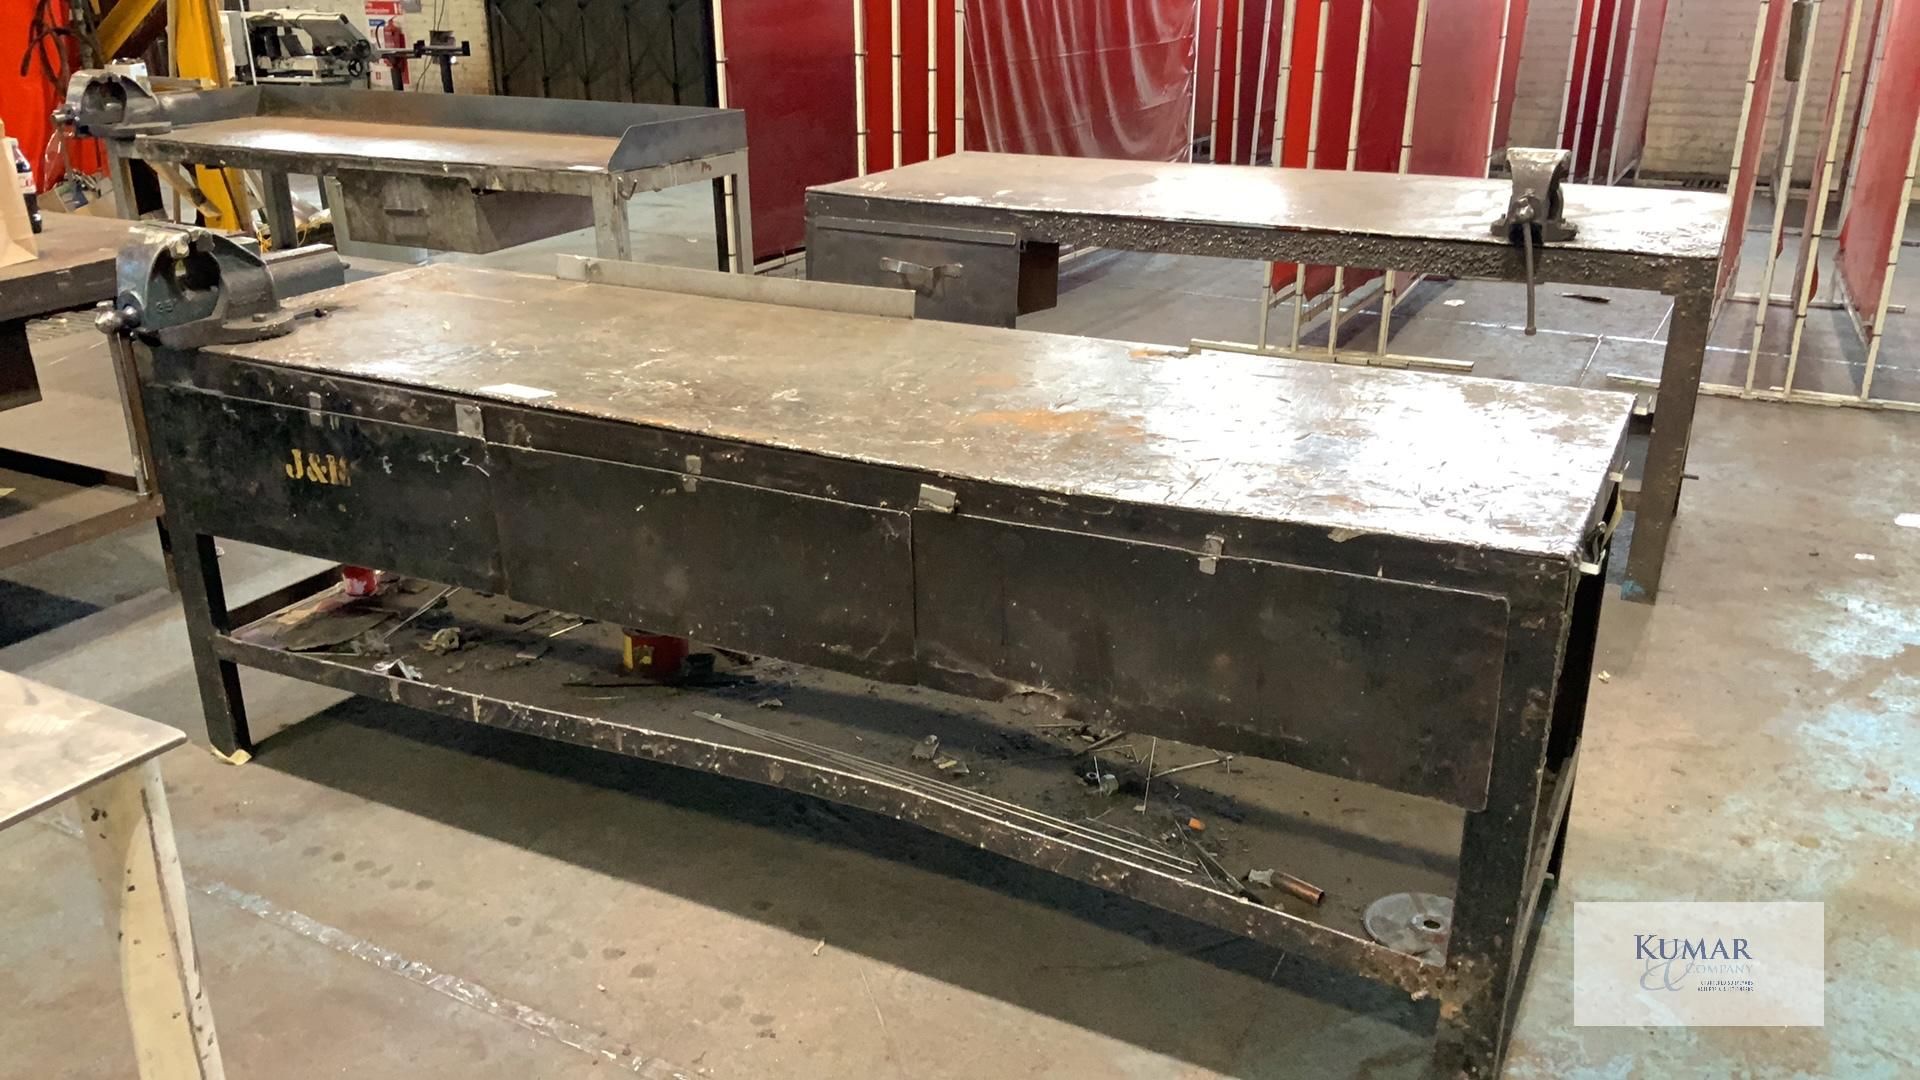 Welded Mild Steel Work Bench with Vice - Dimensions 244cm x 76cm x 85cm Height - Please Note Does - Image 3 of 4